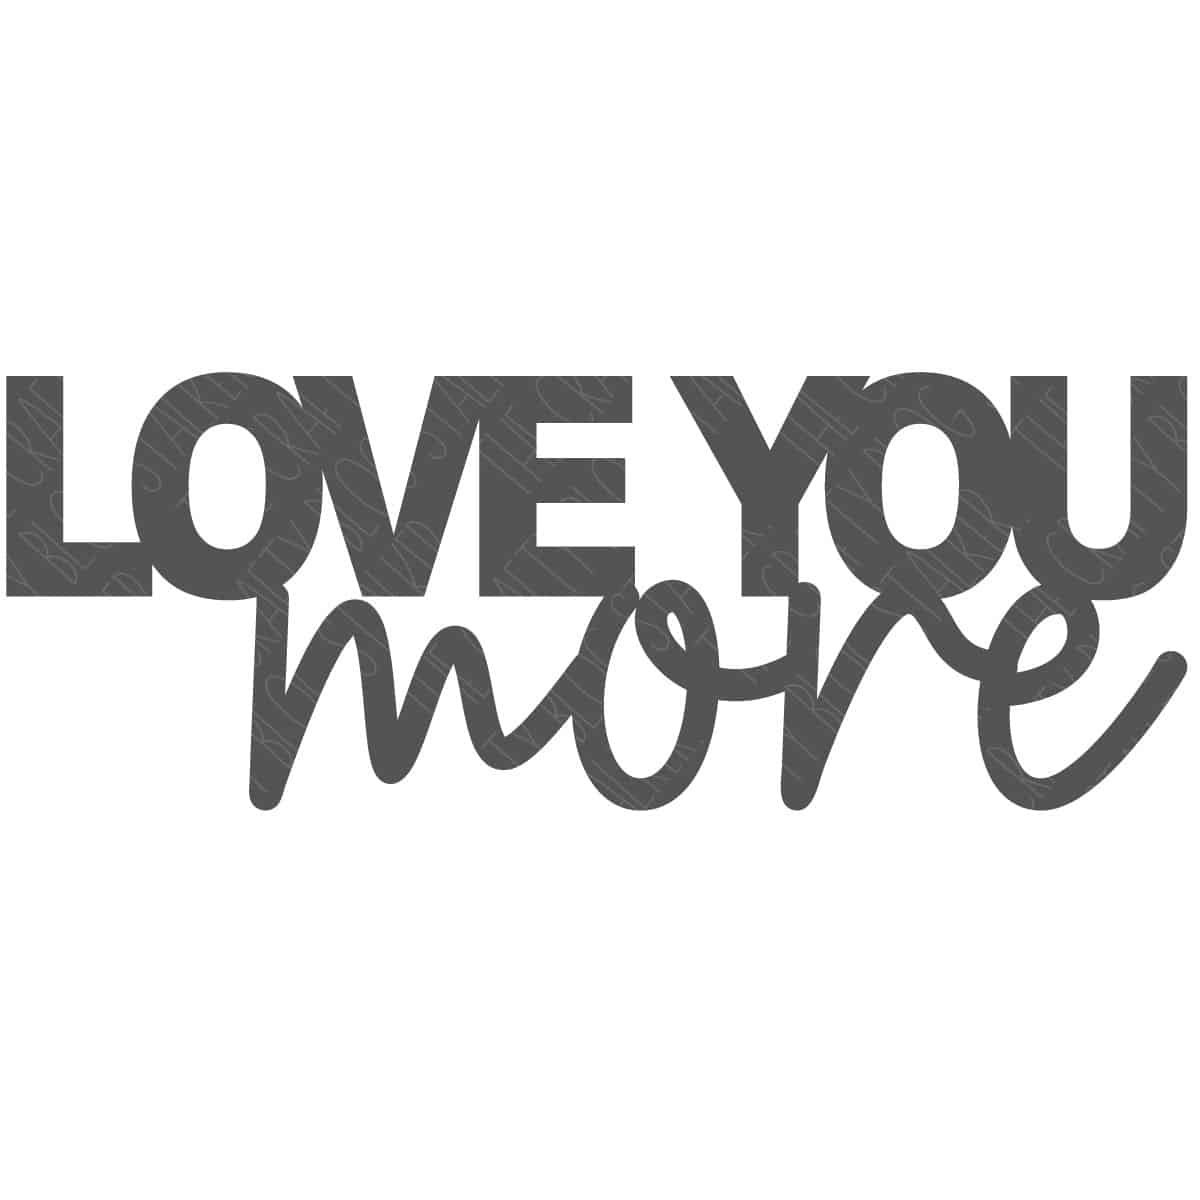 Love You More Sign to be cut with a laser cutter. Square image.